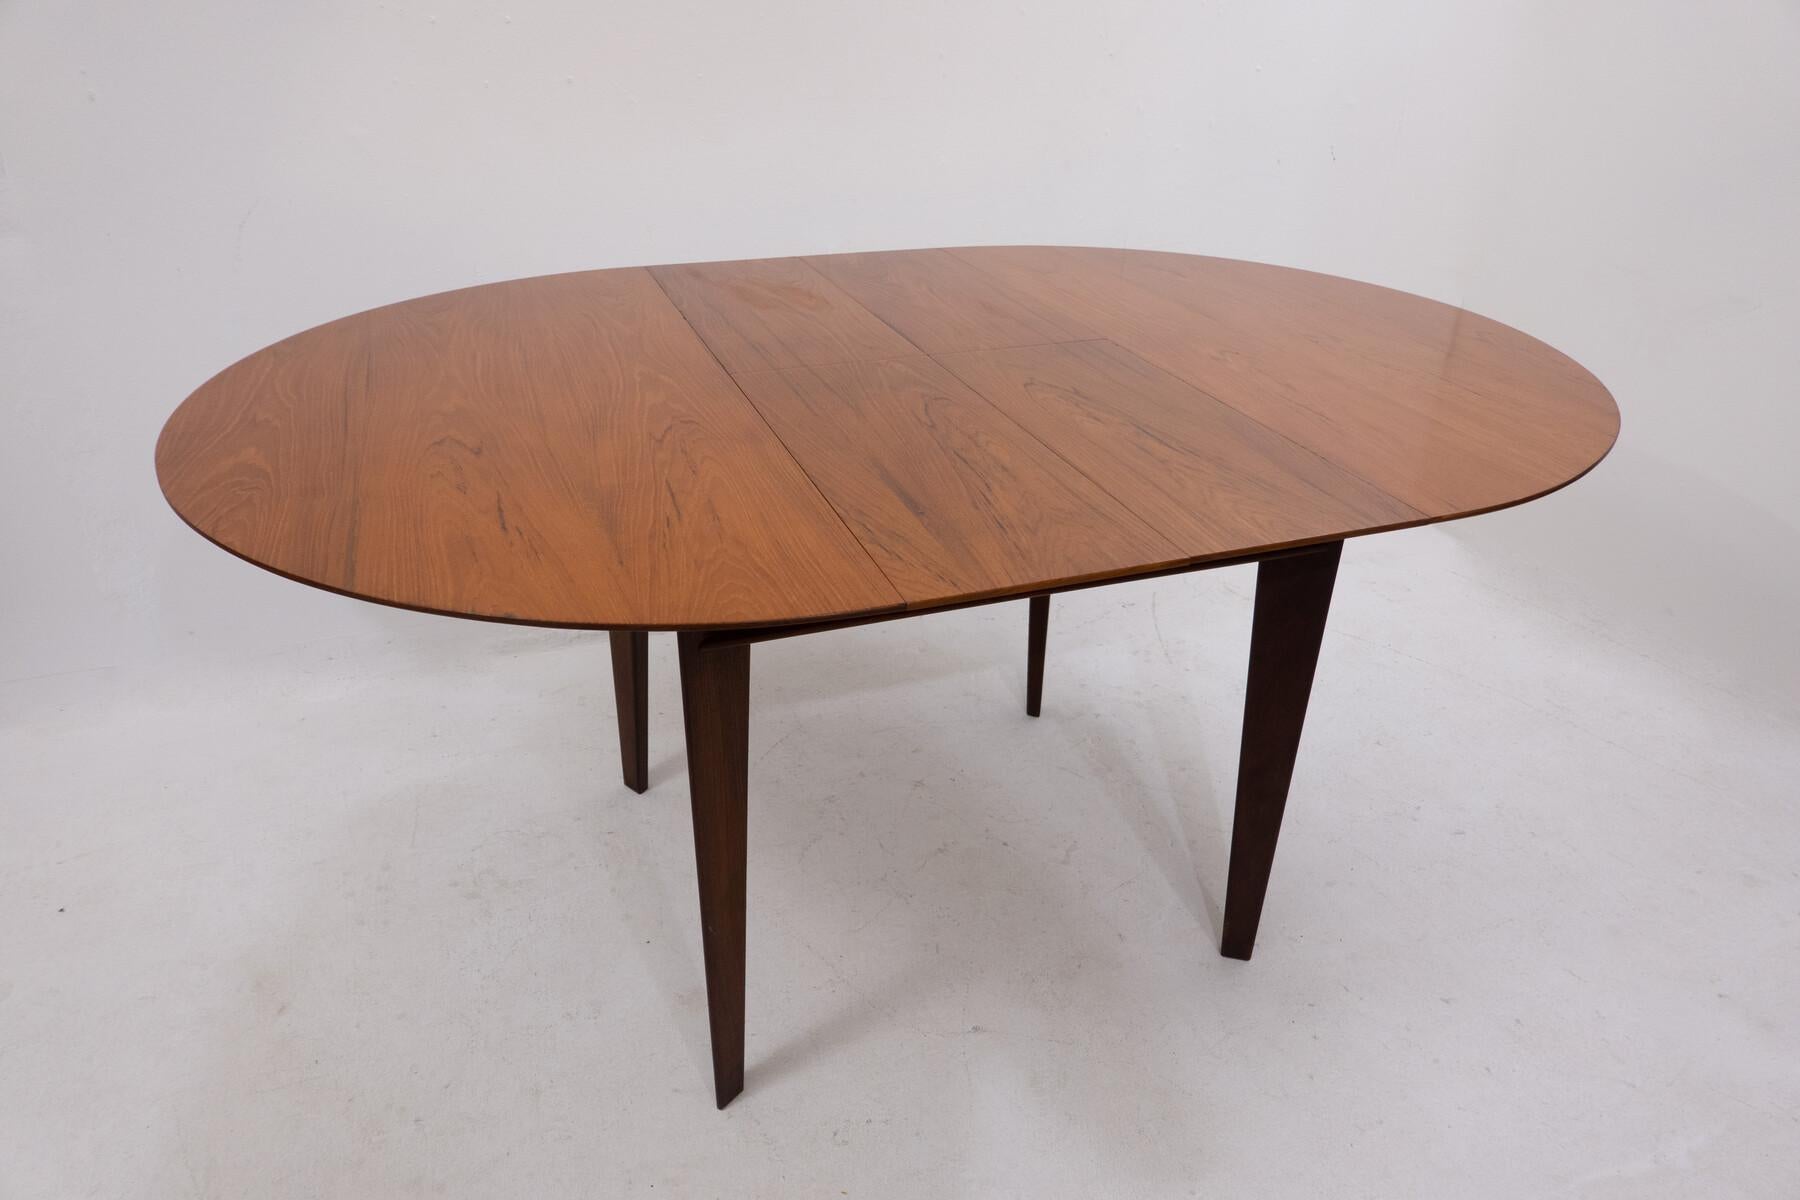 Italian Mid-Century Modern Extending Dining Table by Vittorio Dassi, Teak, Italy, 1950s For Sale